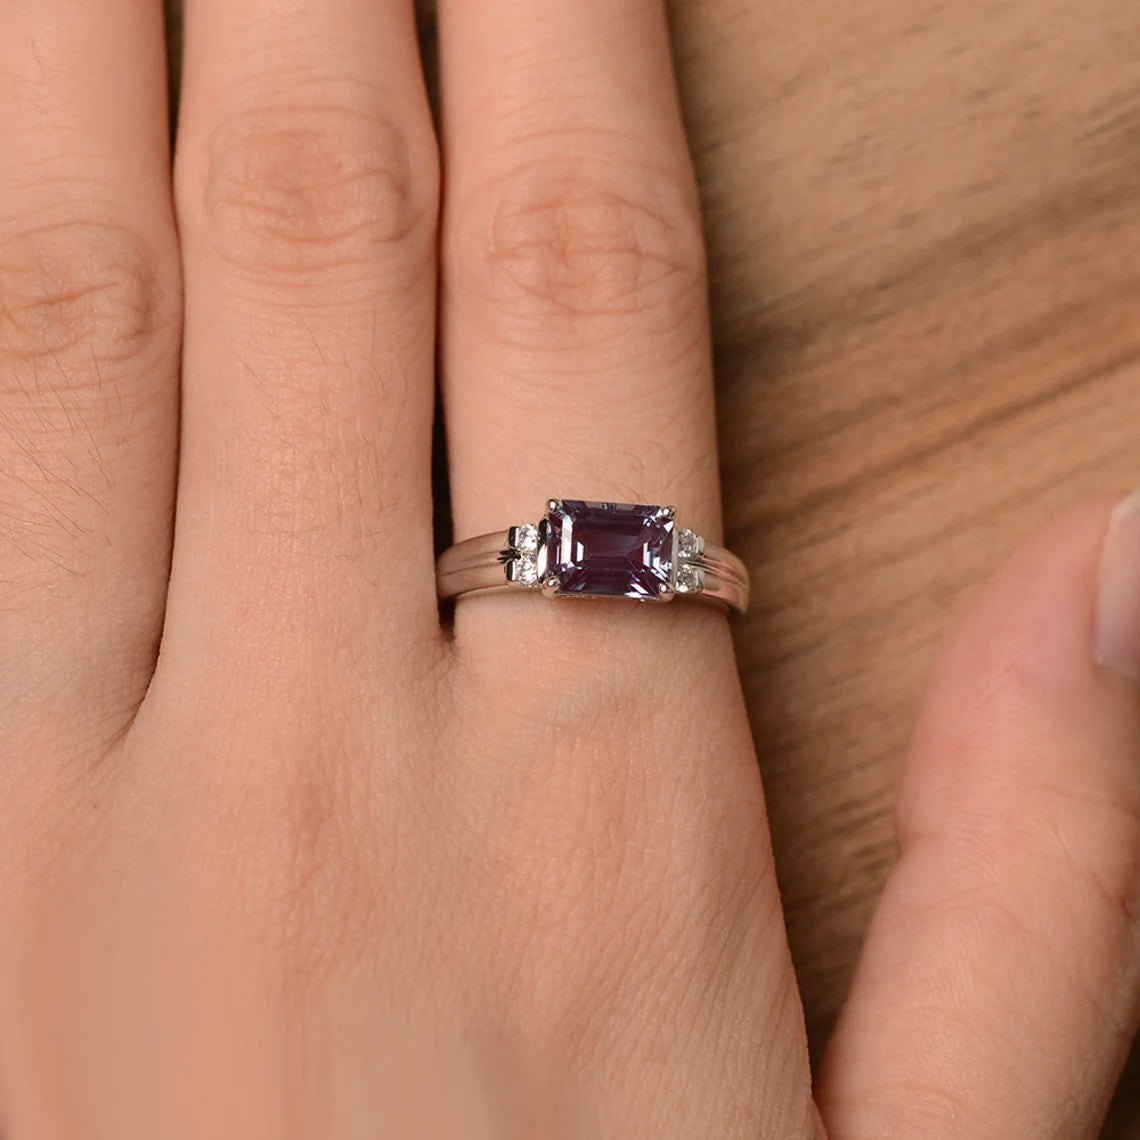 Alexandrite Statement Ring - 925 Sterling Silver Rings